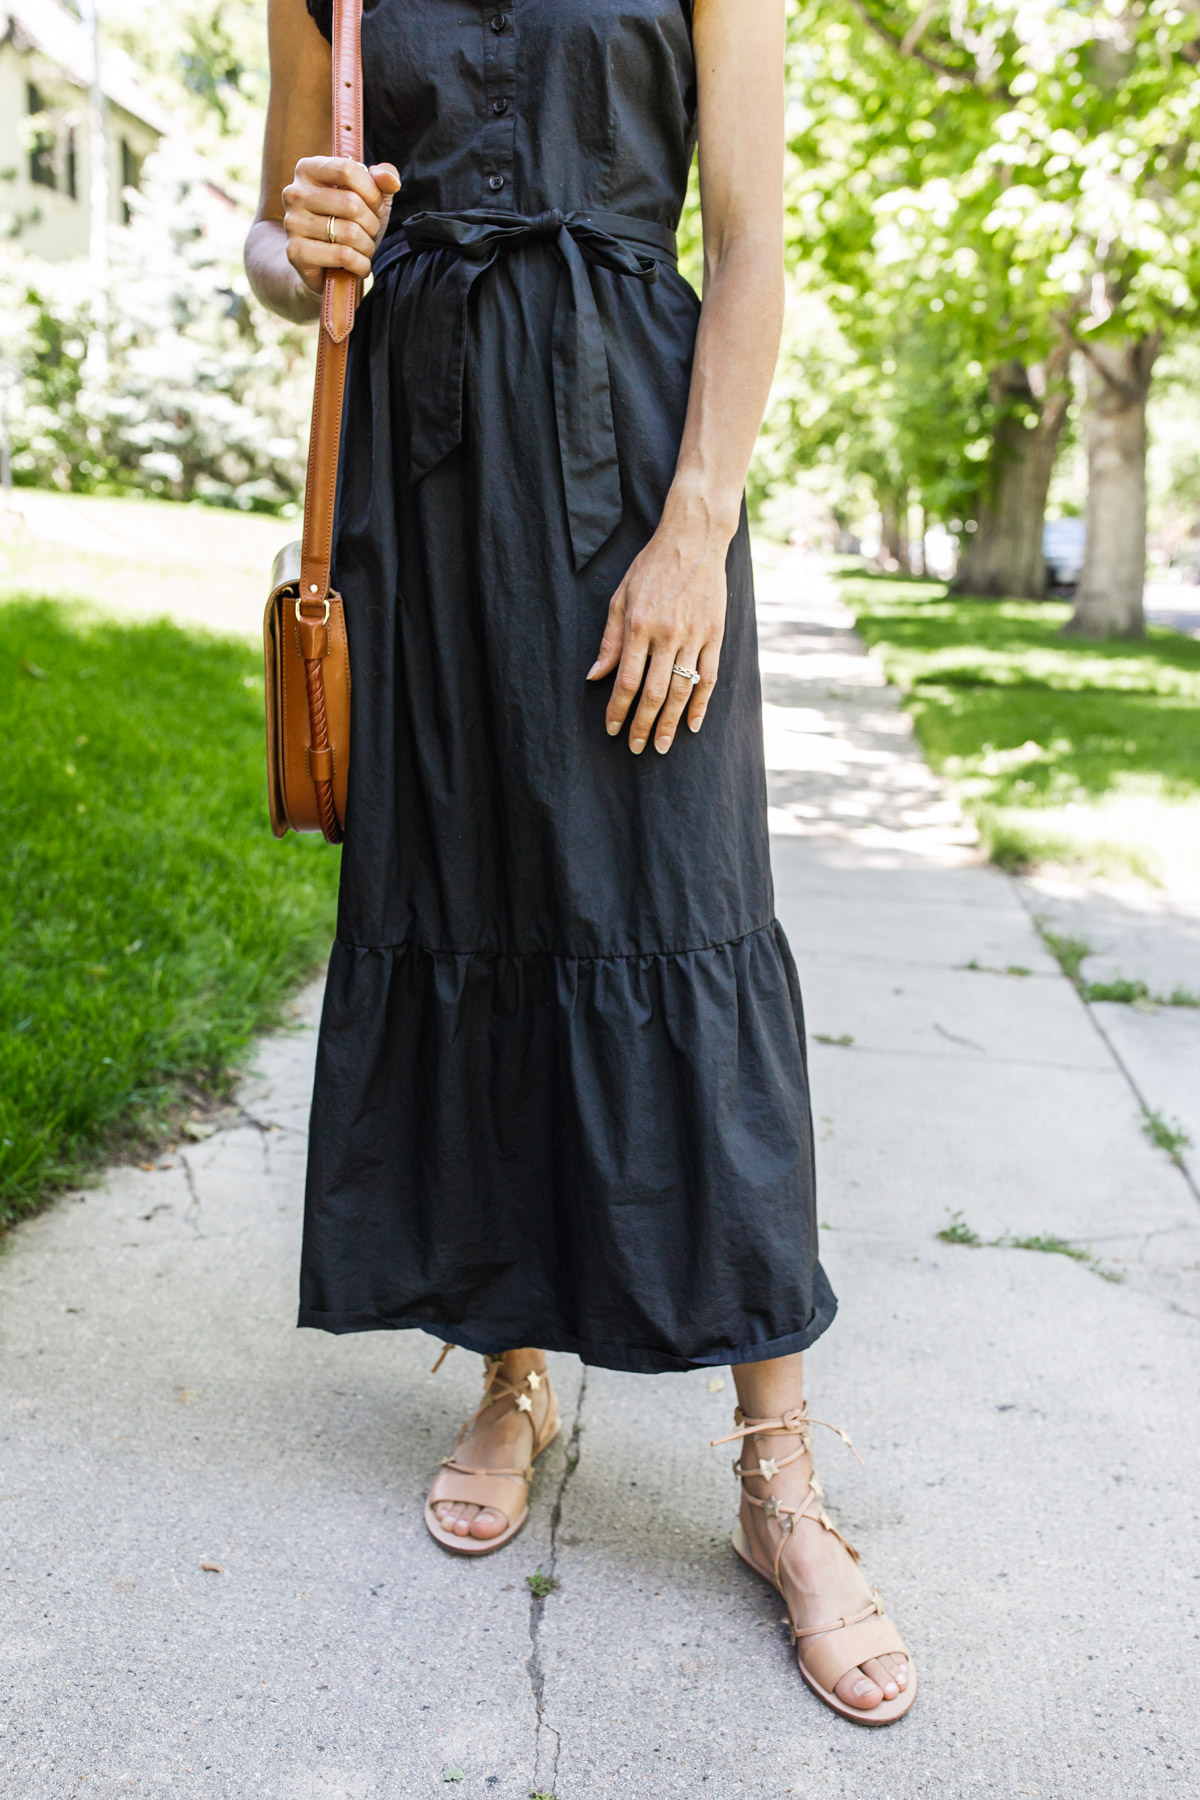 woman wearing $40 Dresses for Summer in black